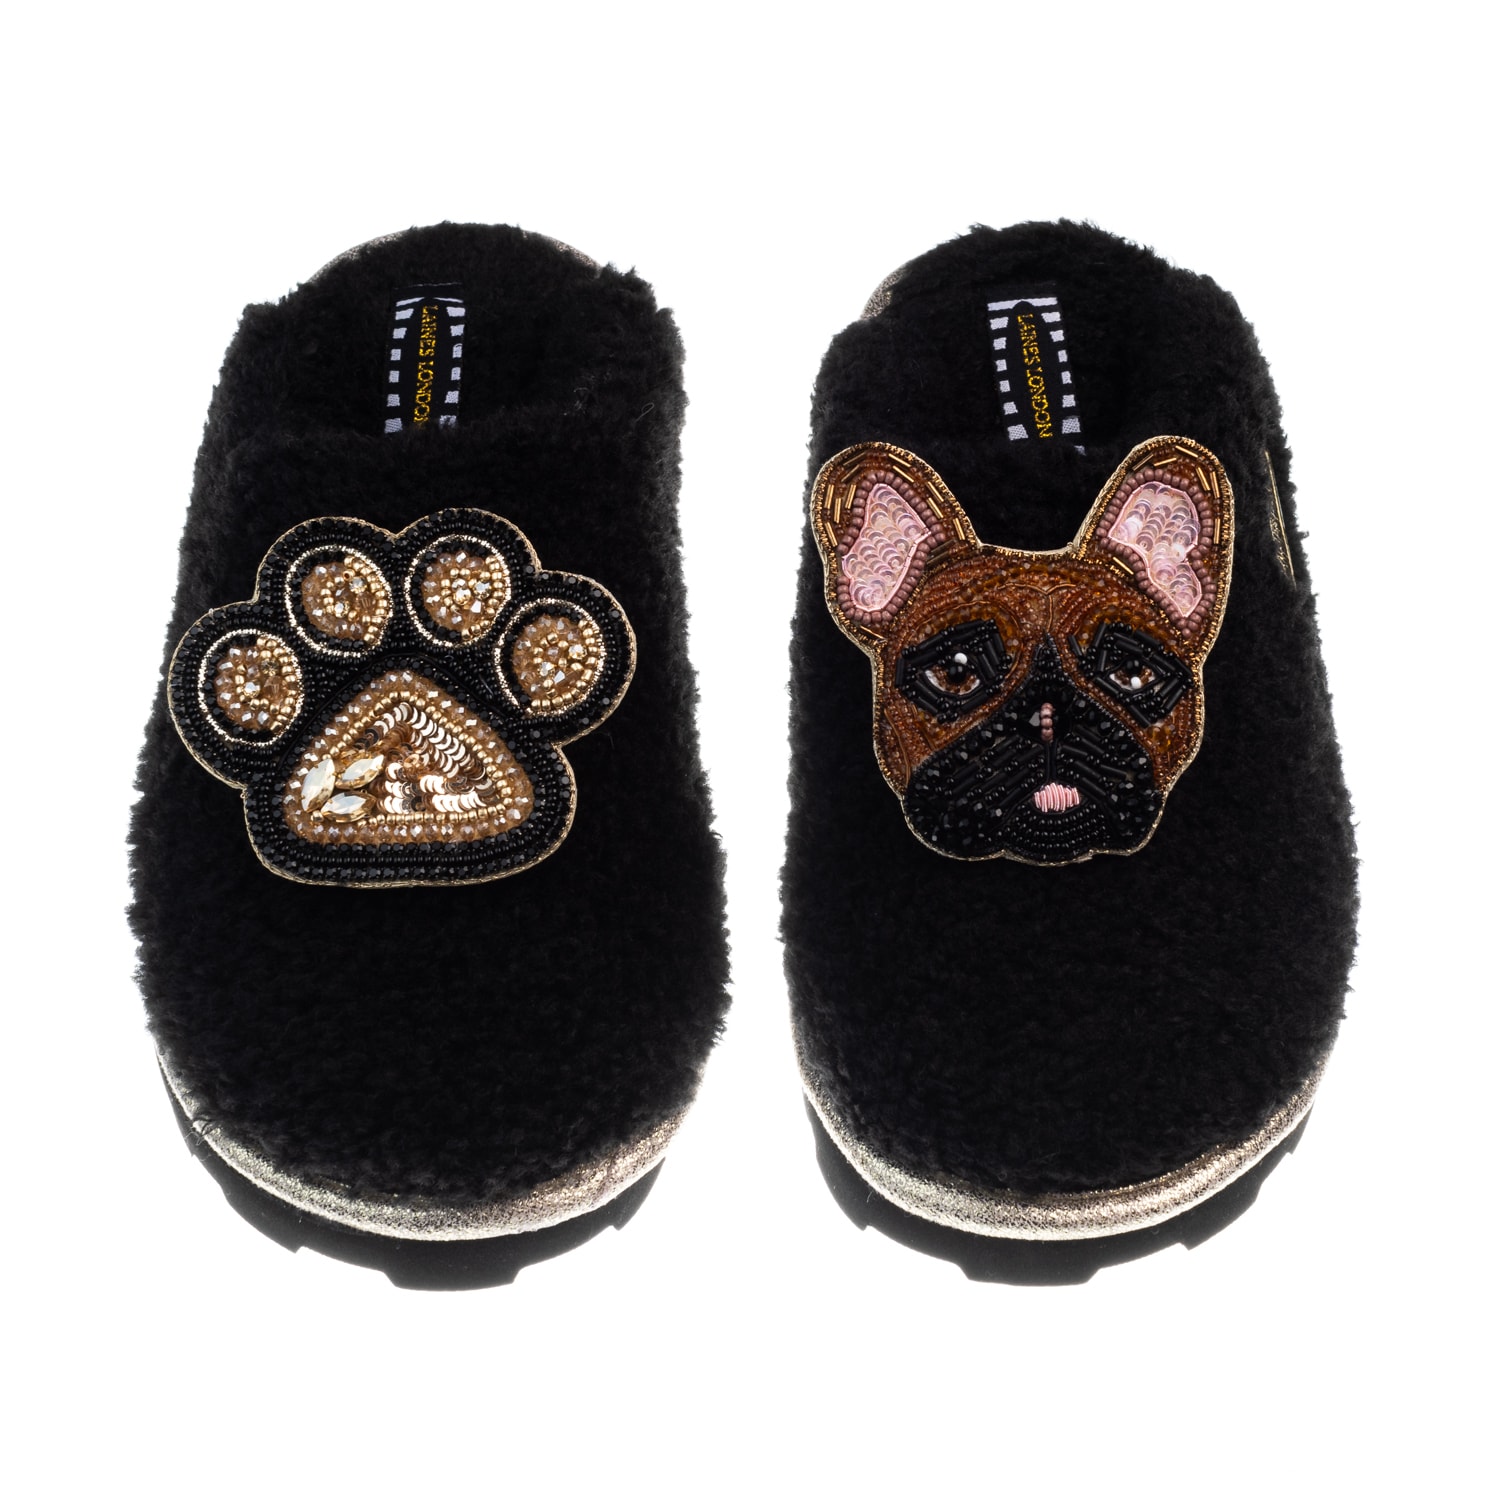 Laines London Women's Teddy Closed Toe Slippers With Cookie The Frenchie & Paw Brooches - Black